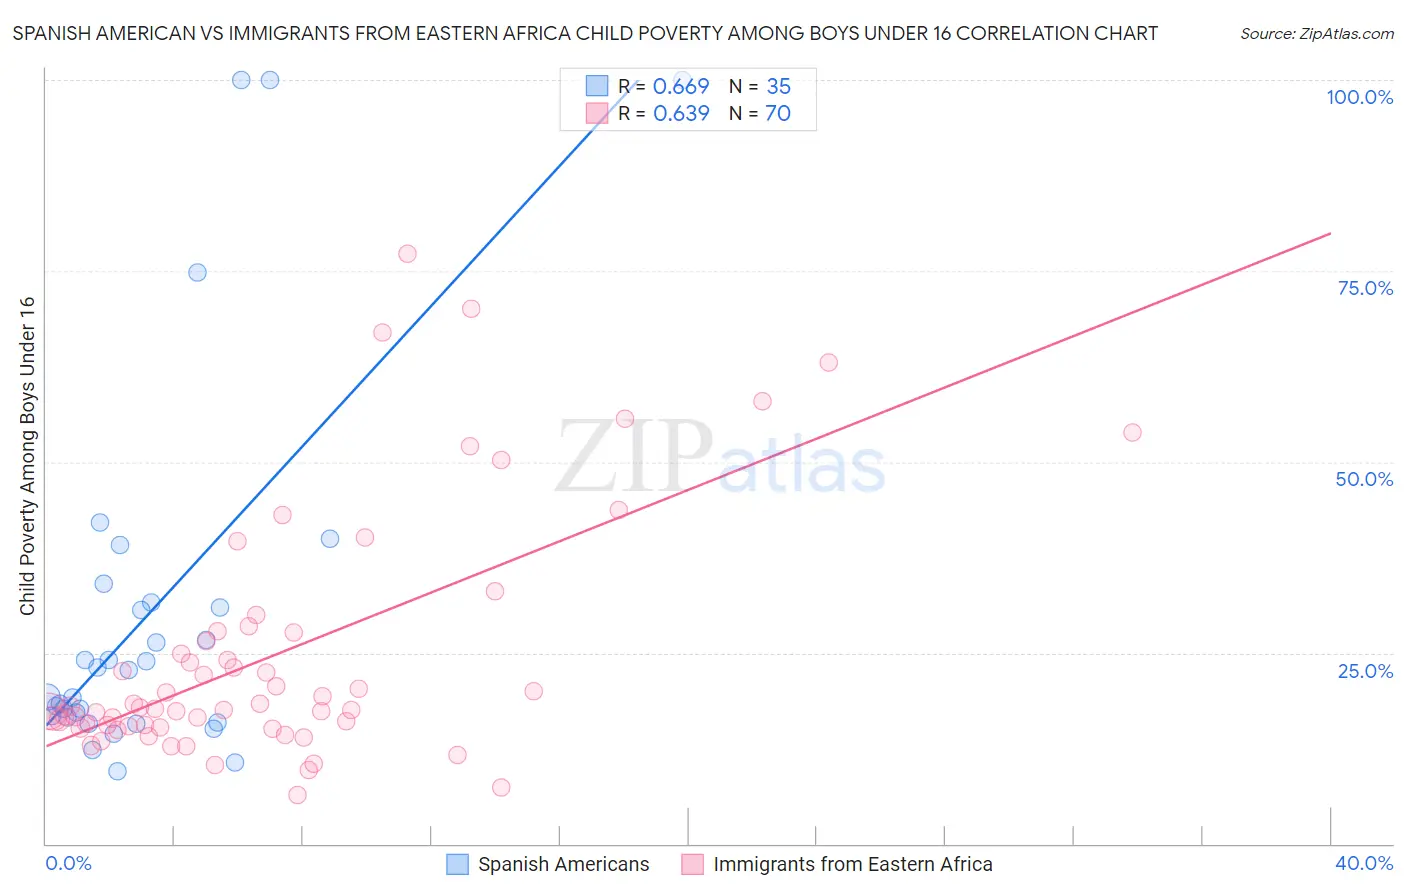 Spanish American vs Immigrants from Eastern Africa Child Poverty Among Boys Under 16